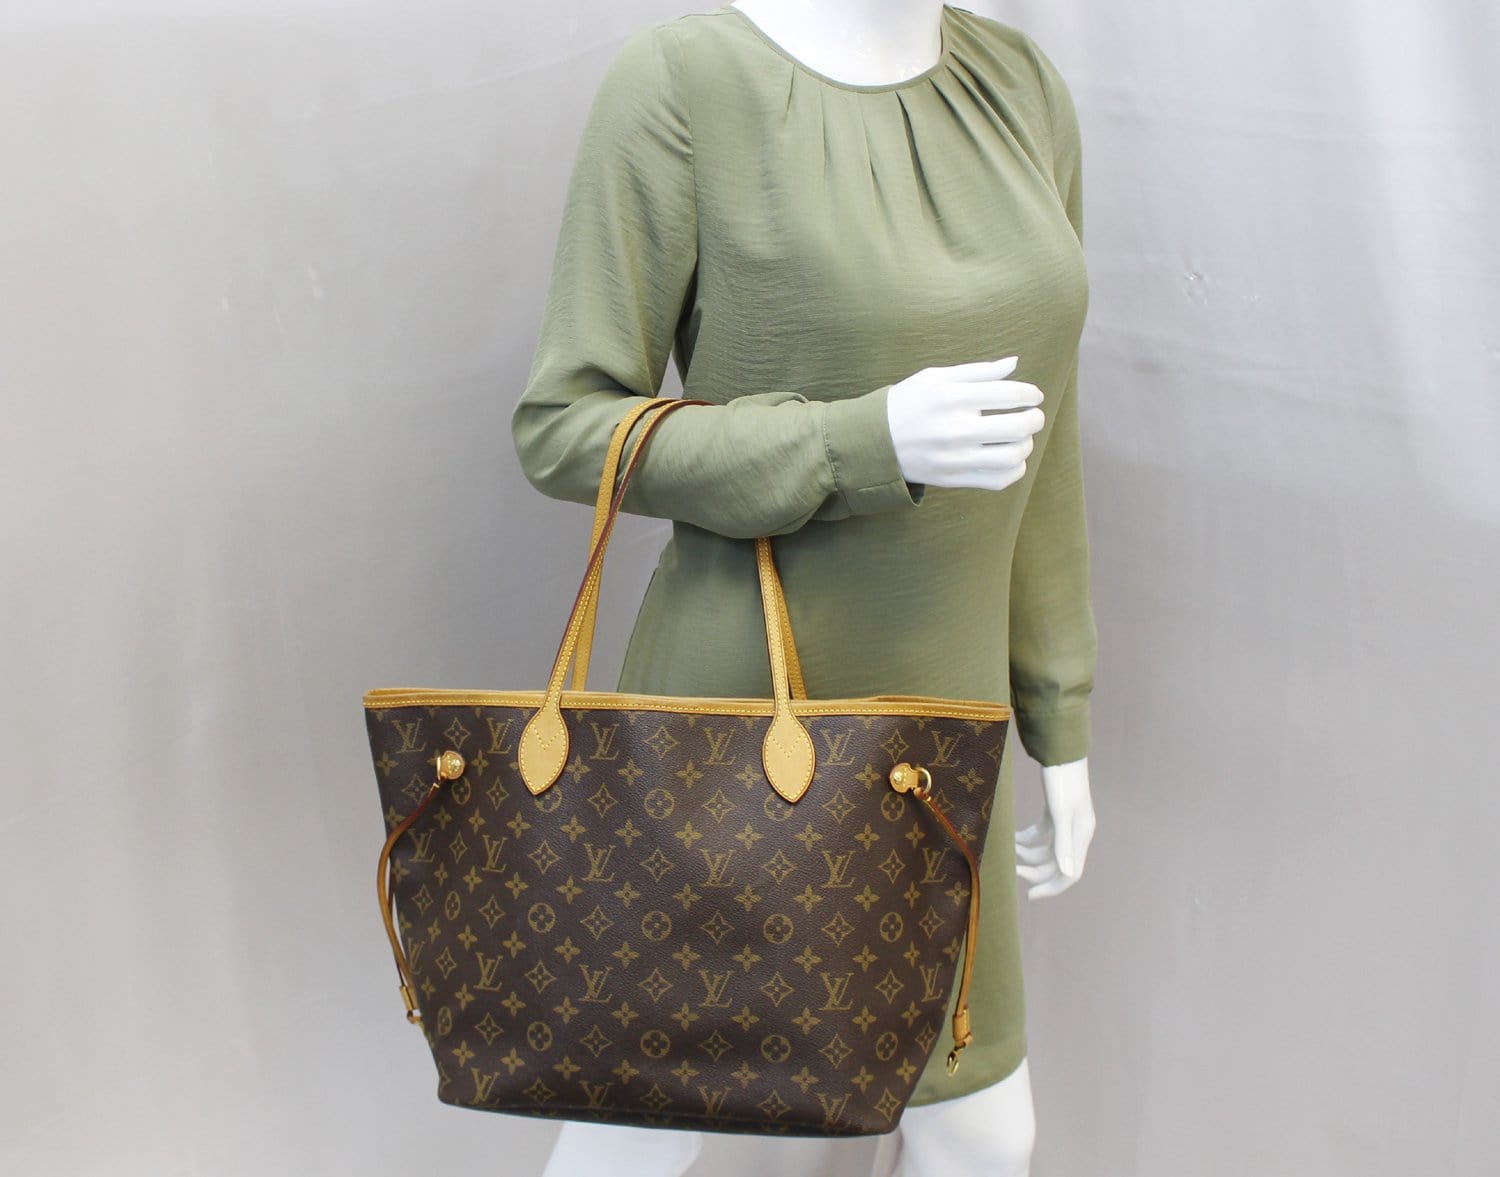 LOUIS VUITTON NEVERFULL BB REVIEW  WORTH IT? 🥰 💓 LV MINI NEVERFULL BB  HANDBAG REVIEW LV MINI BAG 